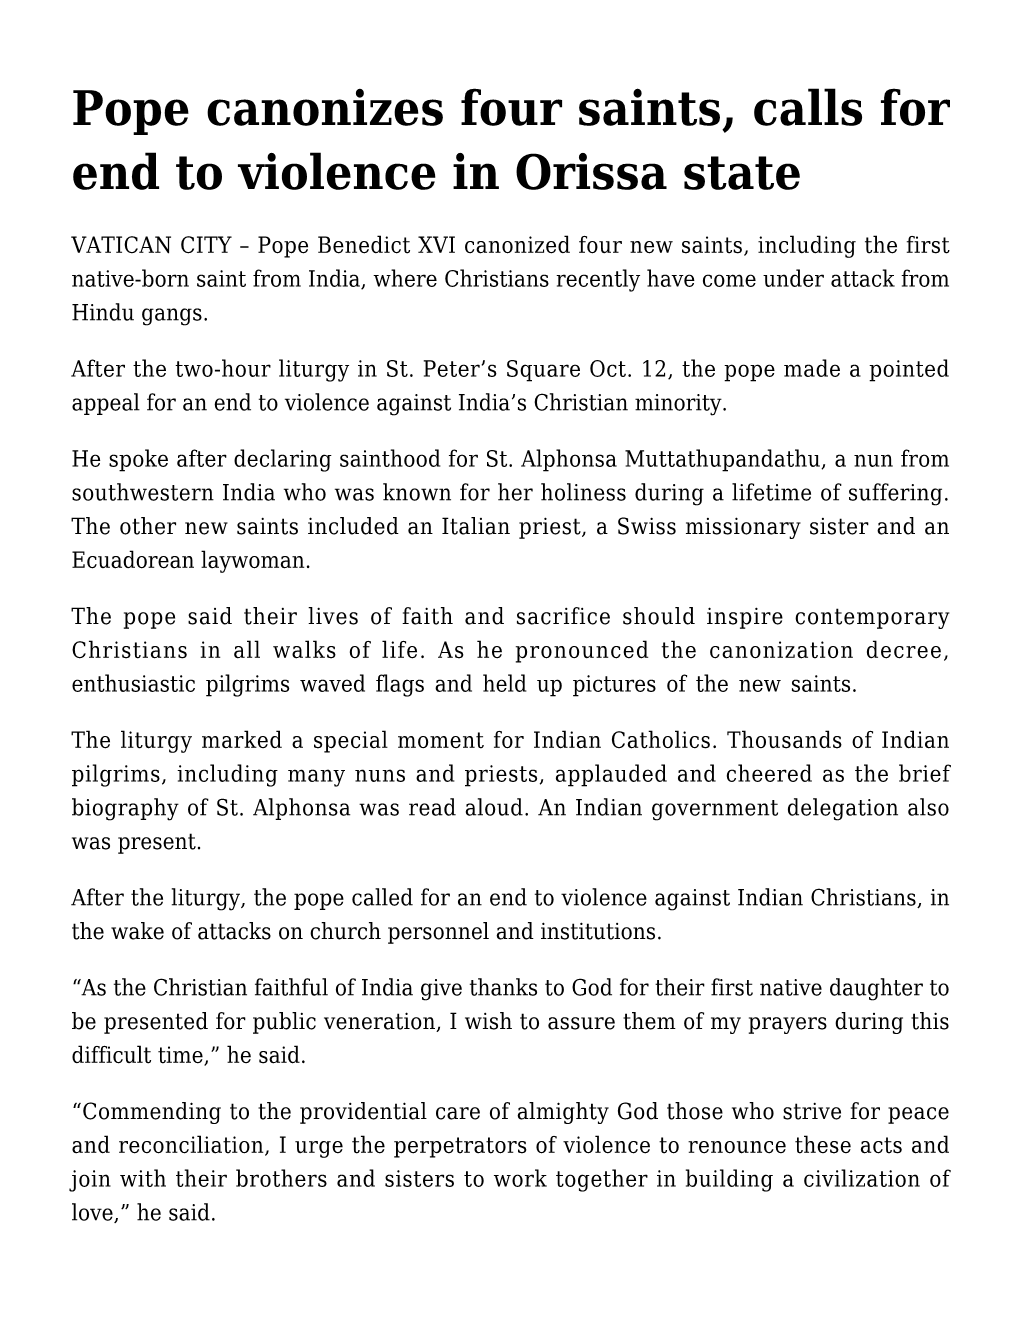 Pope Canonizes Four Saints, Calls for End to Violence in Orissa State